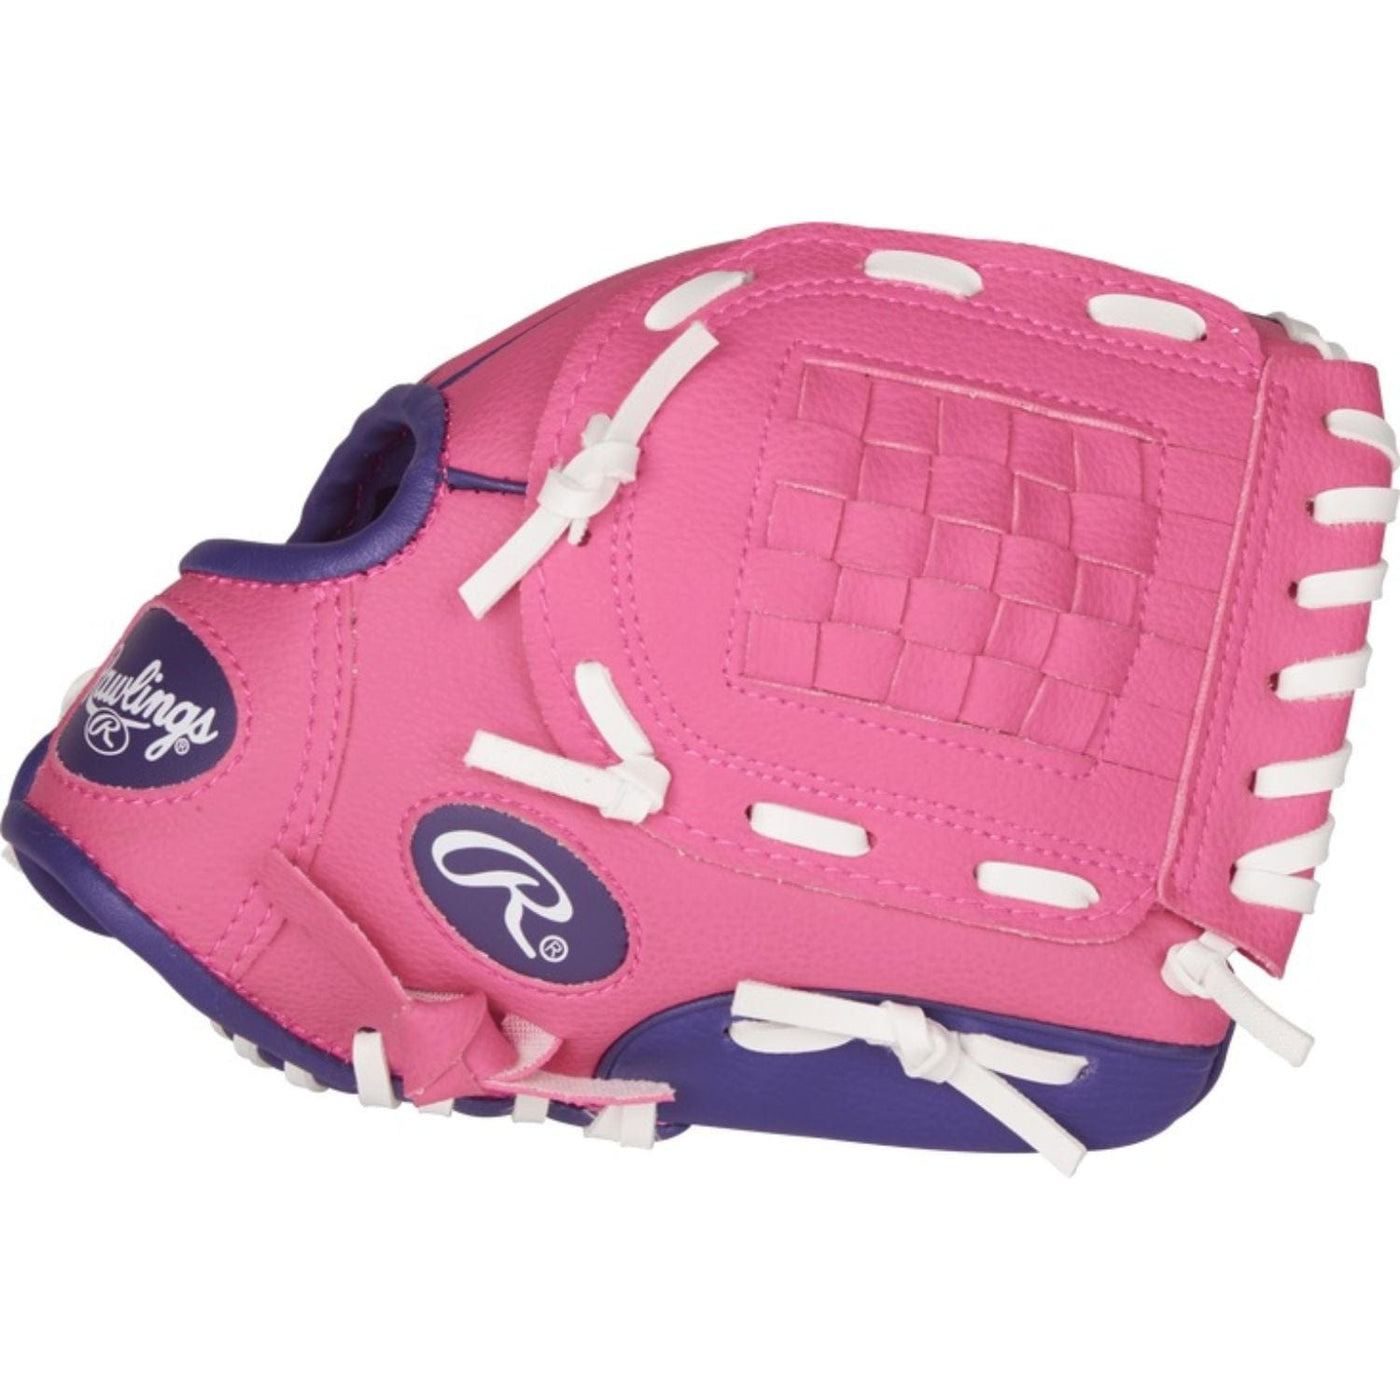 Rawlings Rawlings Players 9 In Youth Softball Glove Left hand Sports